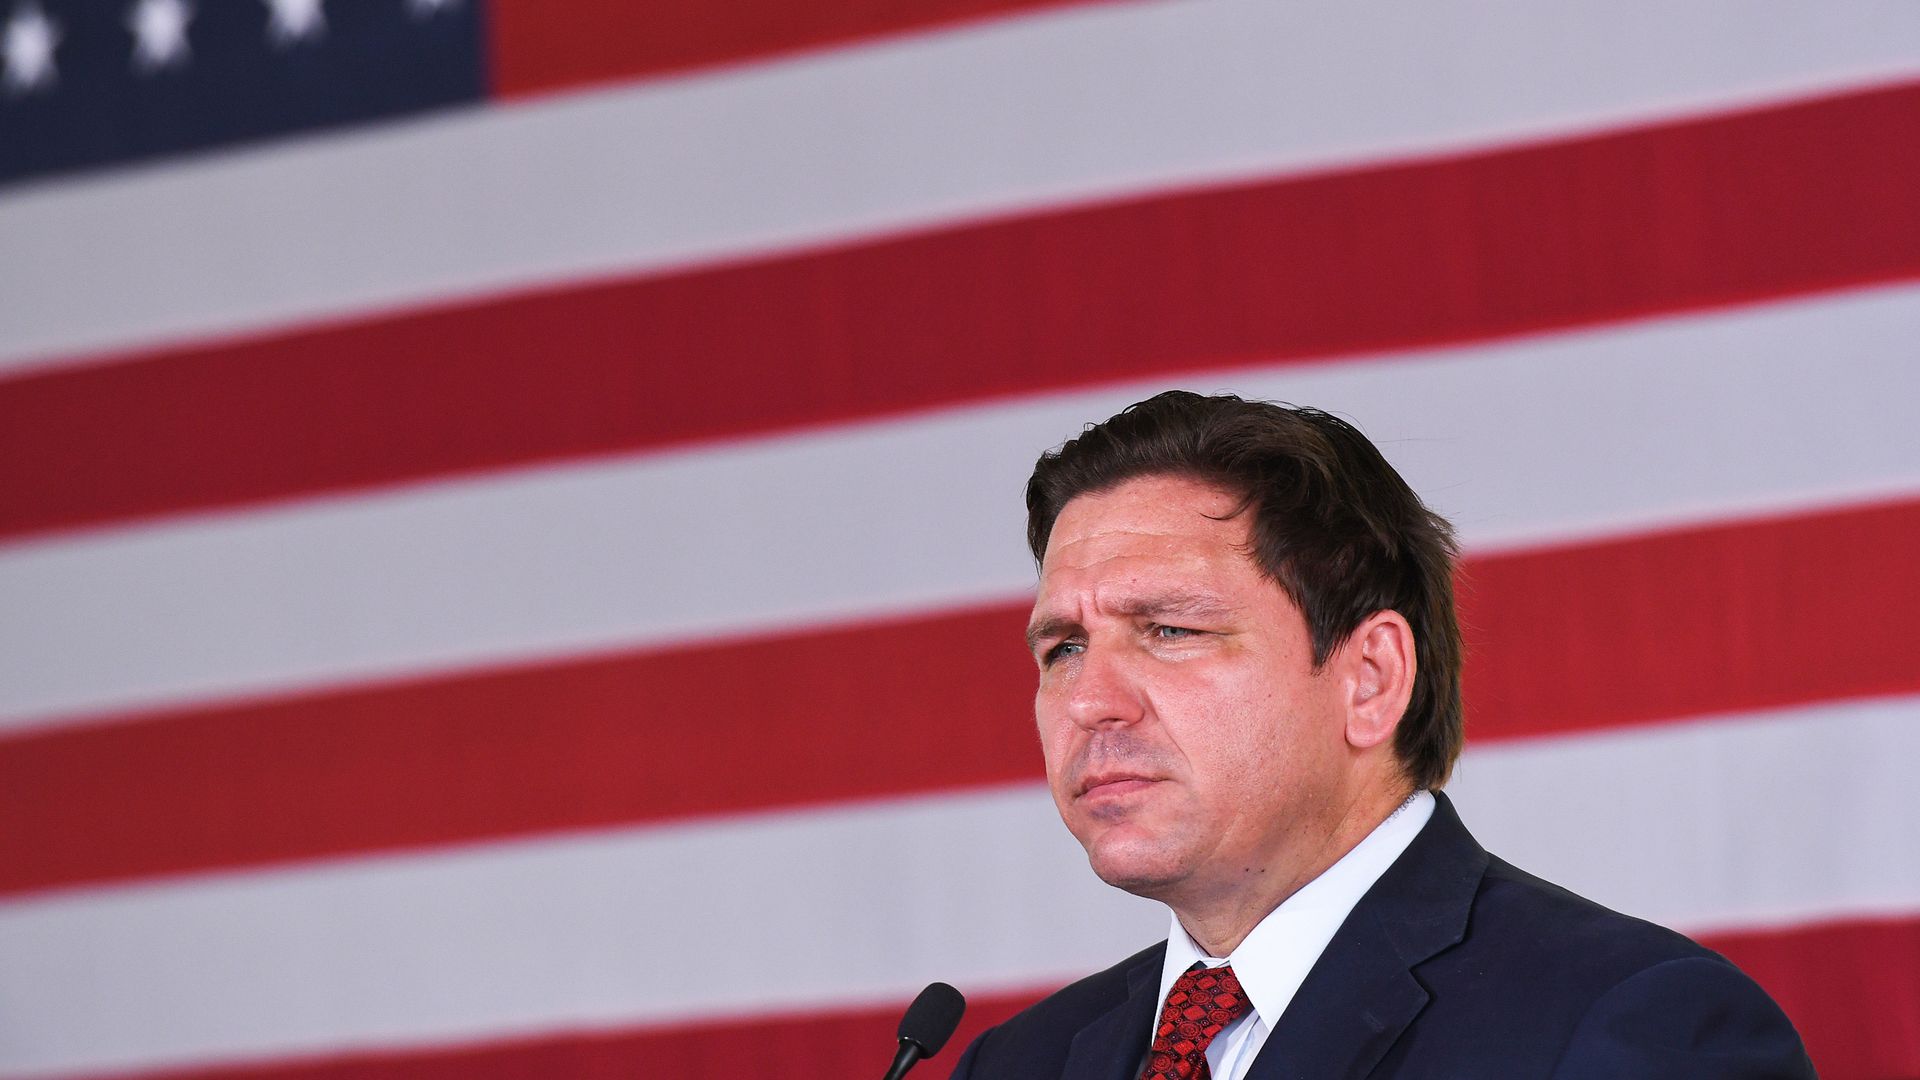 Florida Gov. Ron DeSantis speaks to supporters at a campaign stop on Aug. 24, 2022.